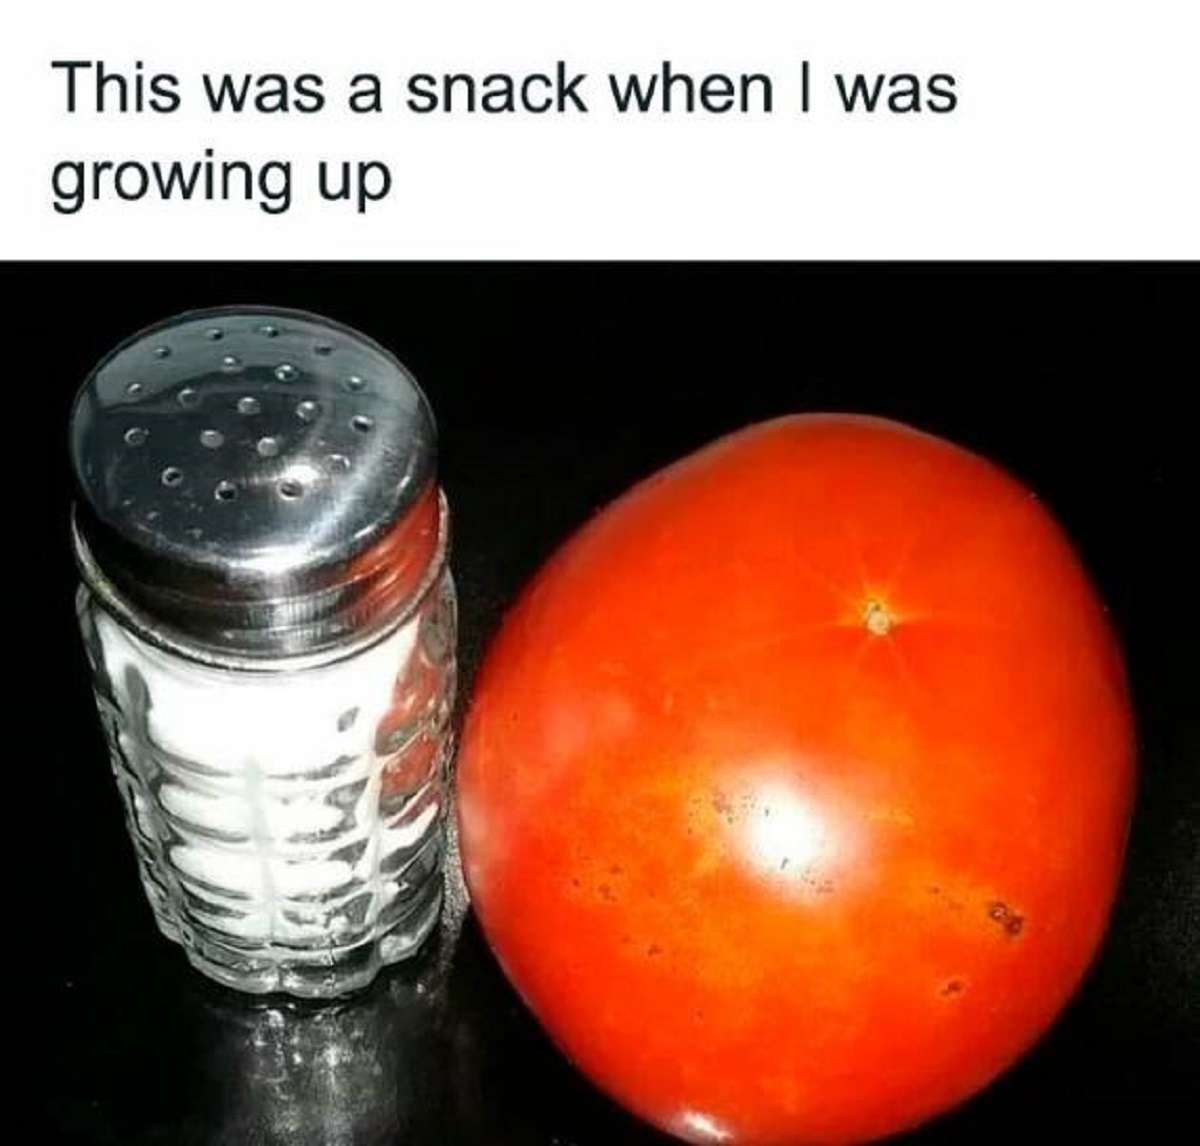 tomato and salt shaker - This was a snack when I was growing up